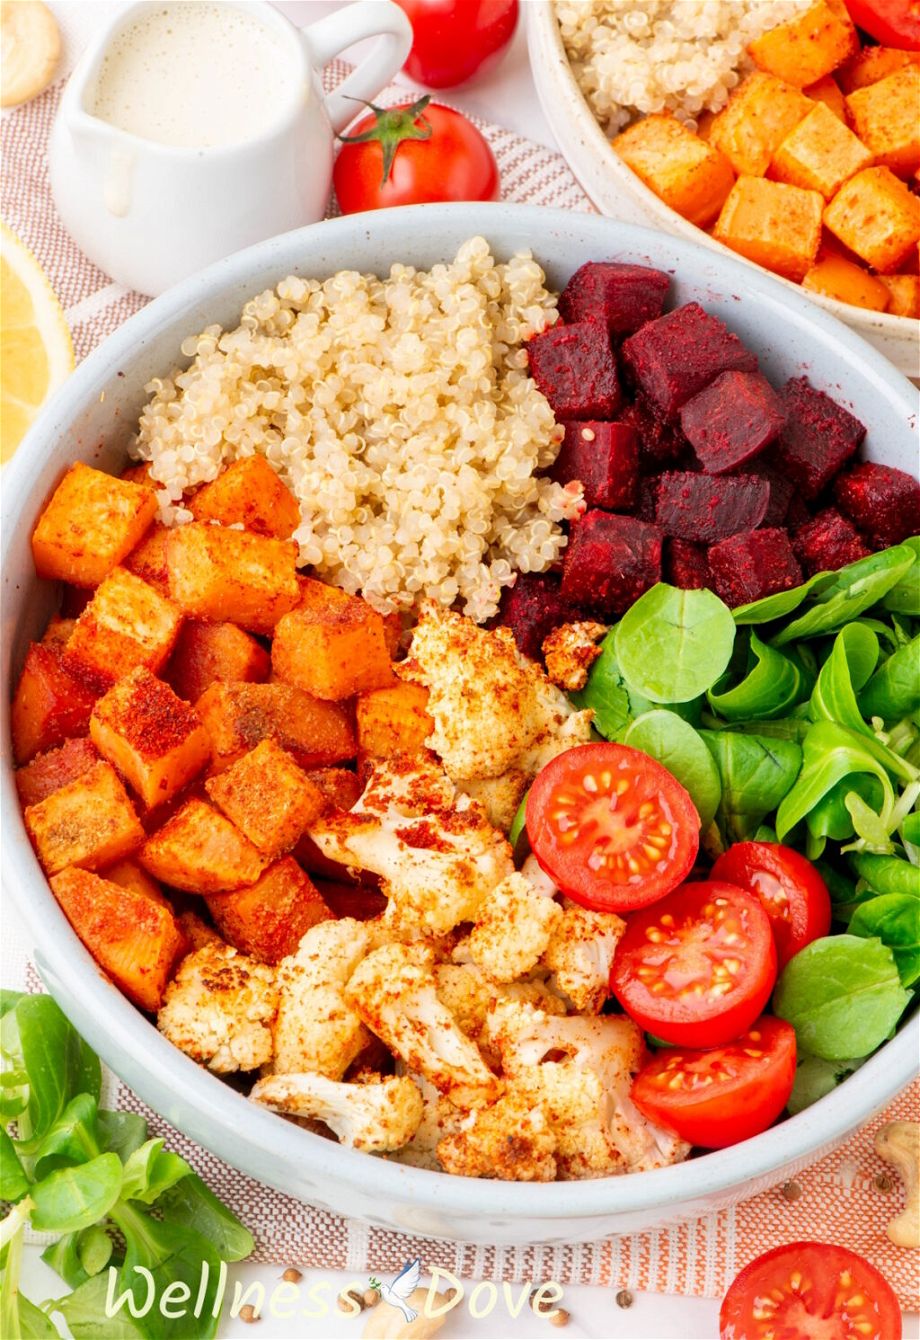 the Roasted Cauliflower Quinoa Beet Bowl without sauce